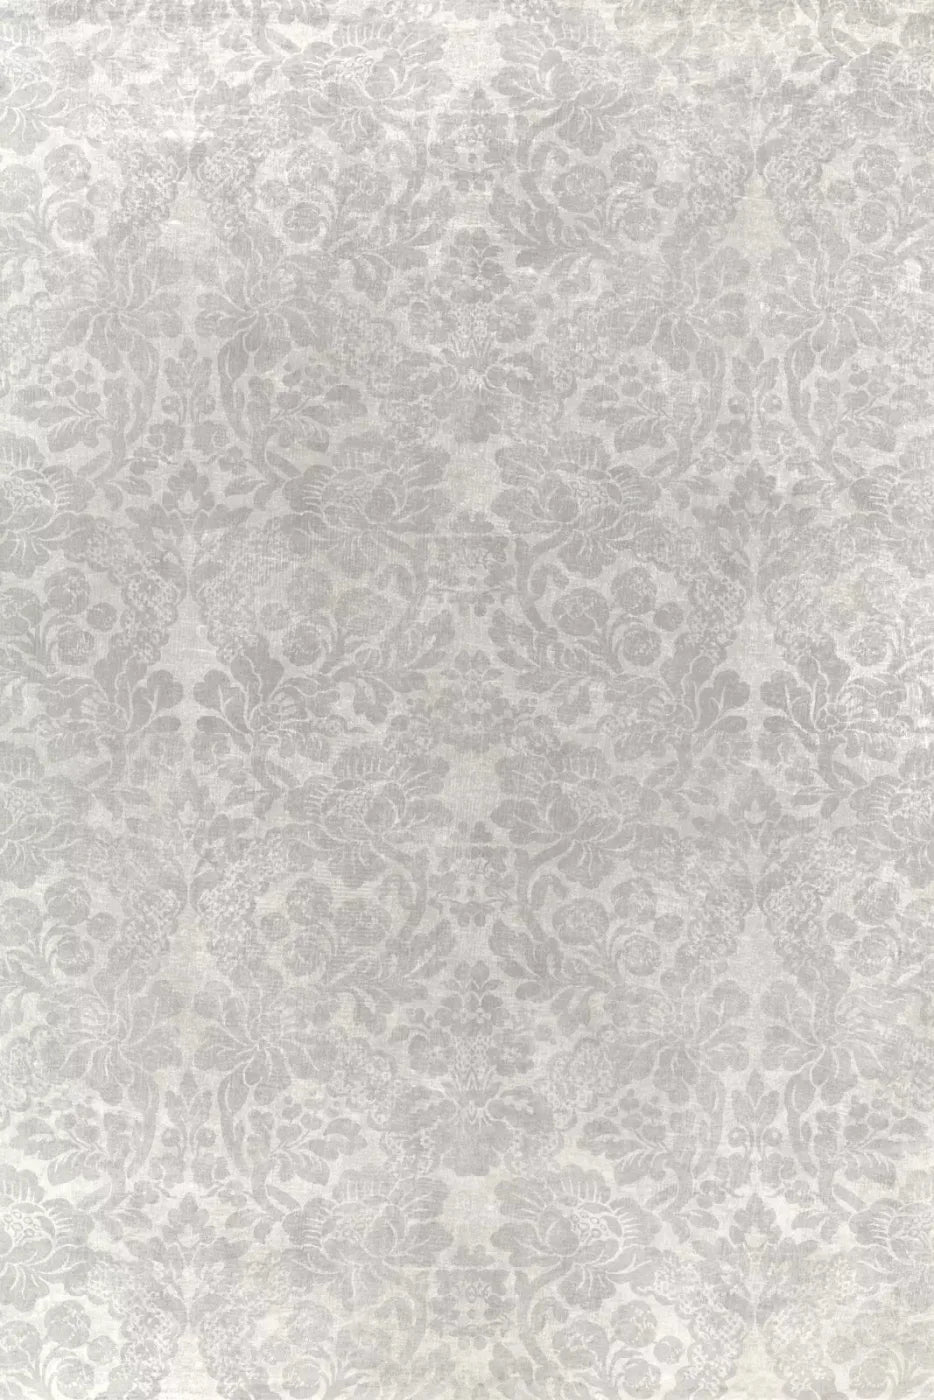 Classic Texture Warm Gray Damask Backdrop